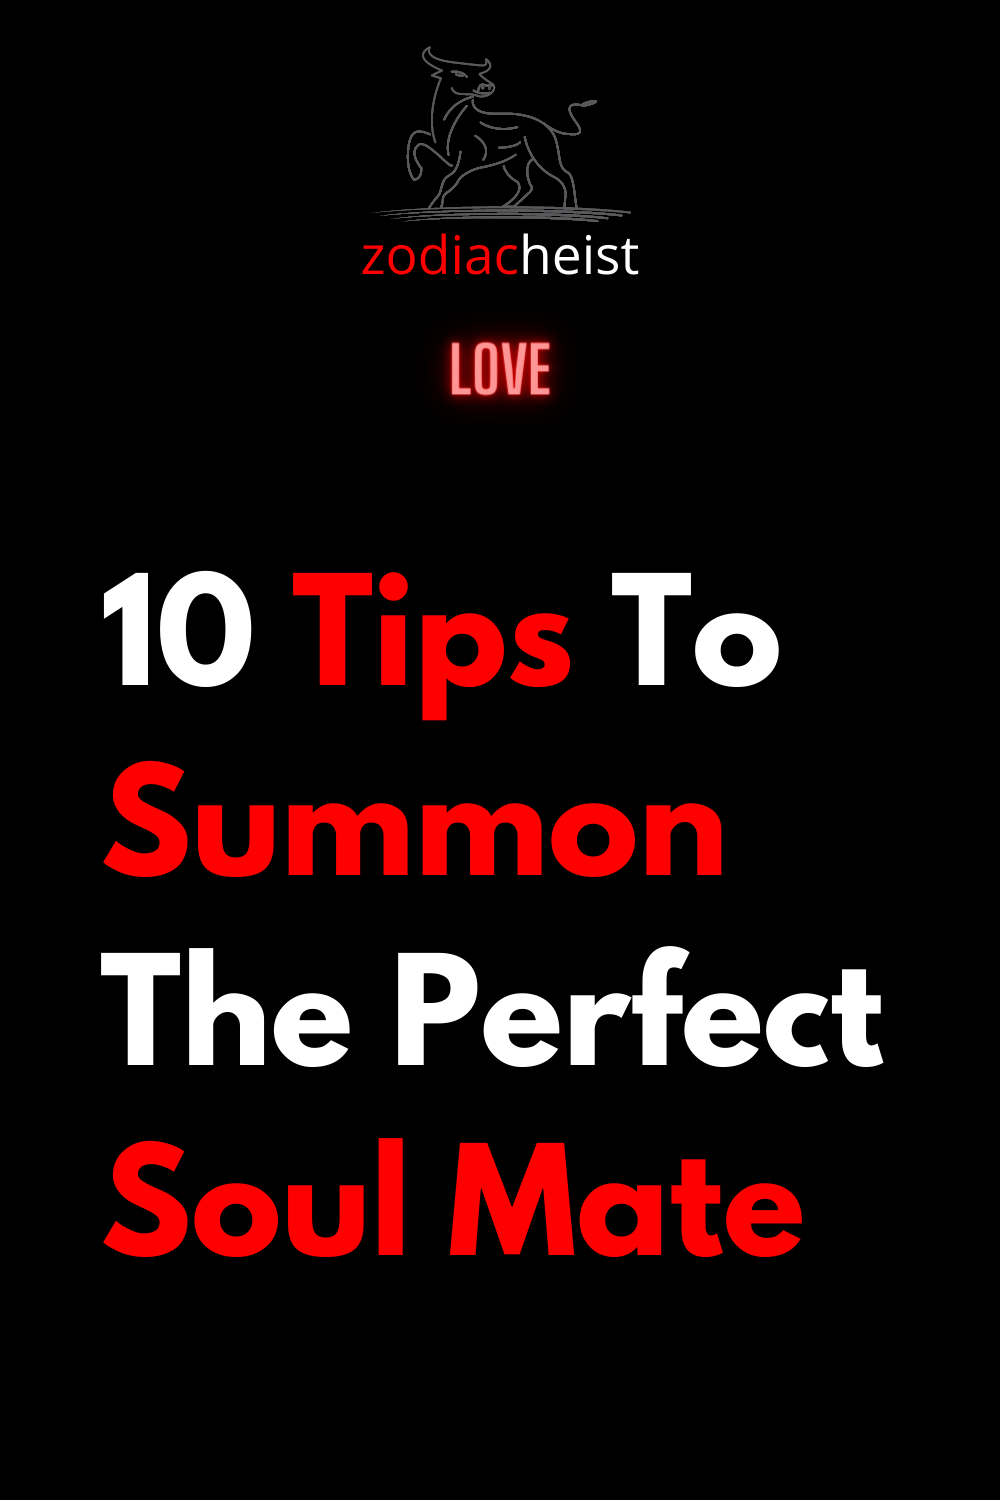 10 Tips To Summon The Perfect Soul Mate